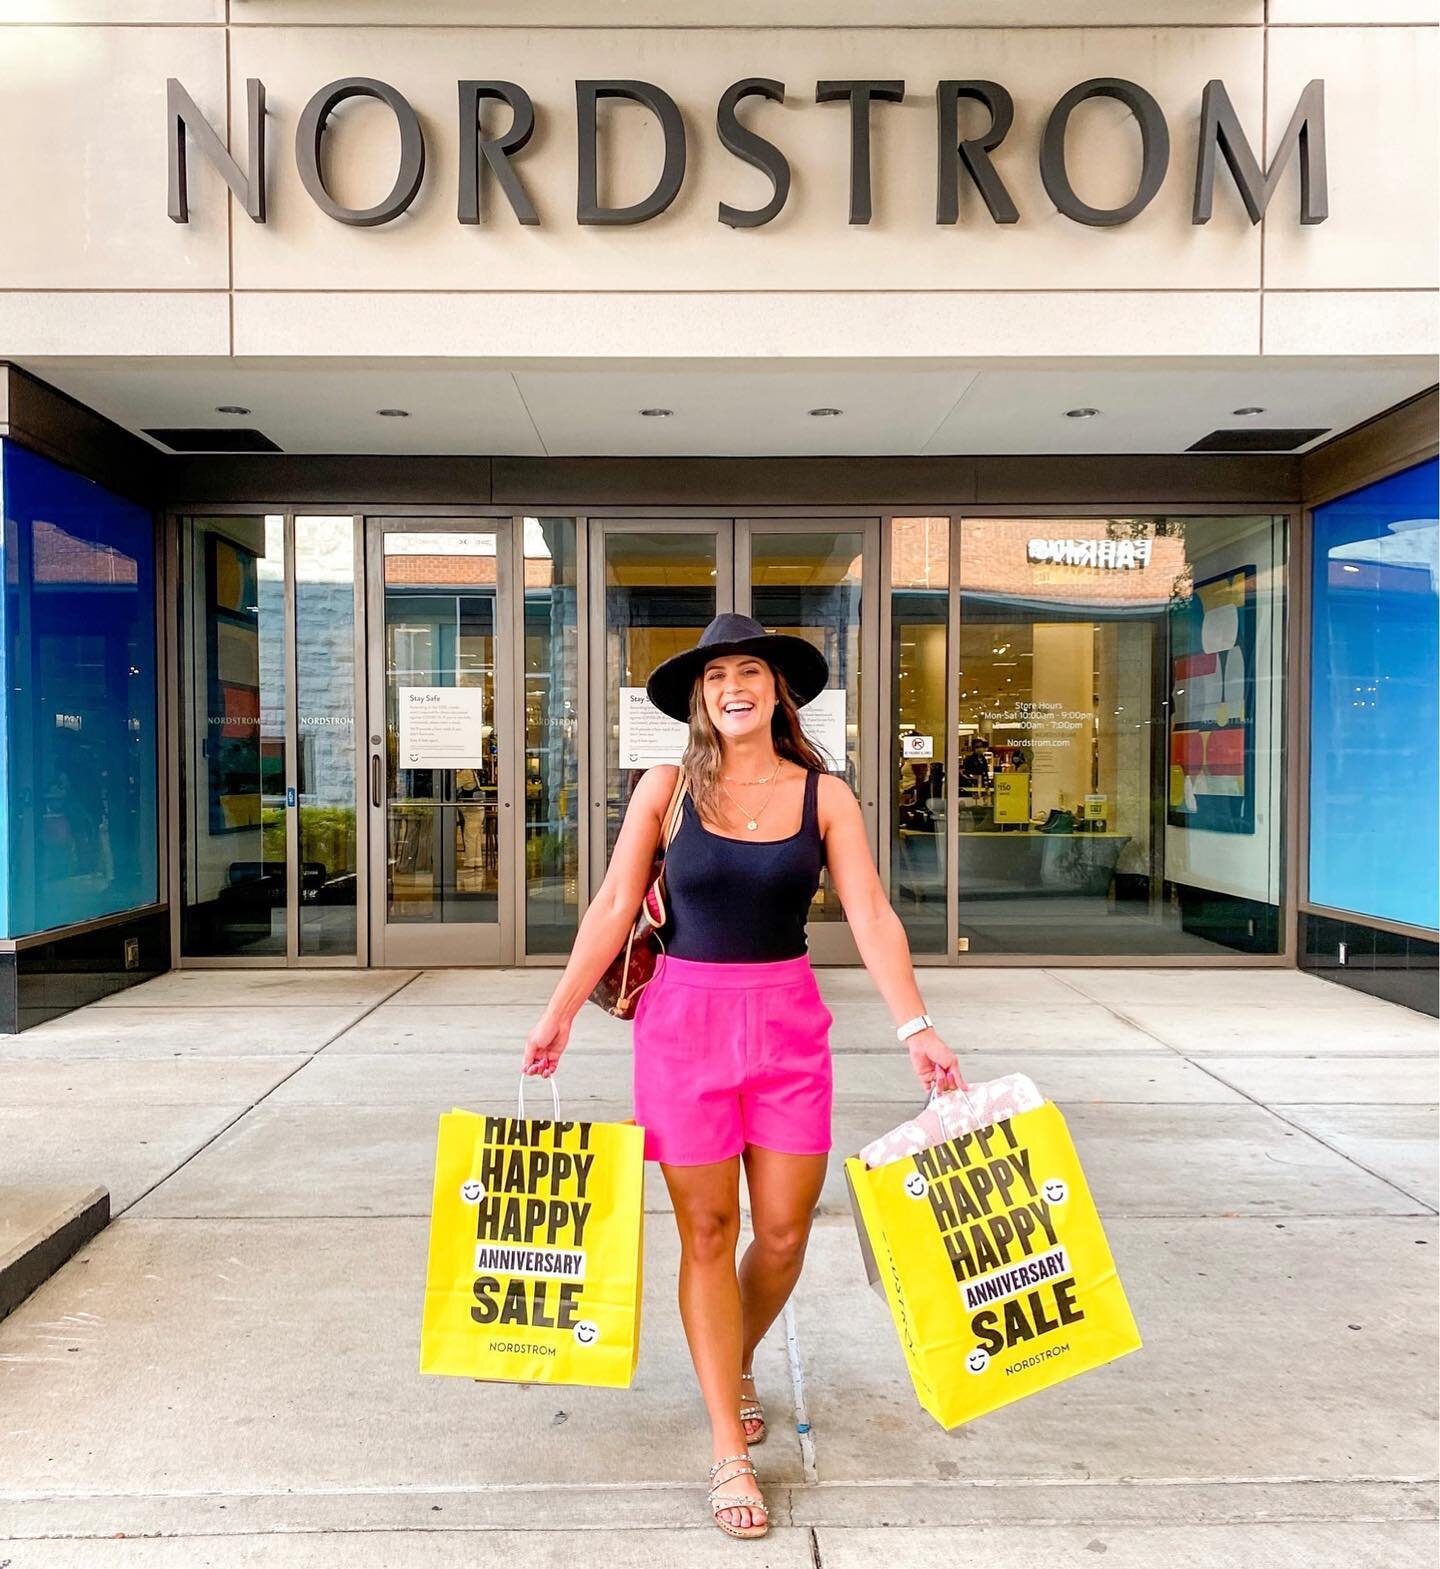 Had such a fun girls day with @tabathabaconblog shopping the @nordstrom sale last week! It opens to everyone on Wednesday, so get your wishlist ready if you want to shop it! Just in case you missed my YouTube video I vlogged shopping and my haul! Cli